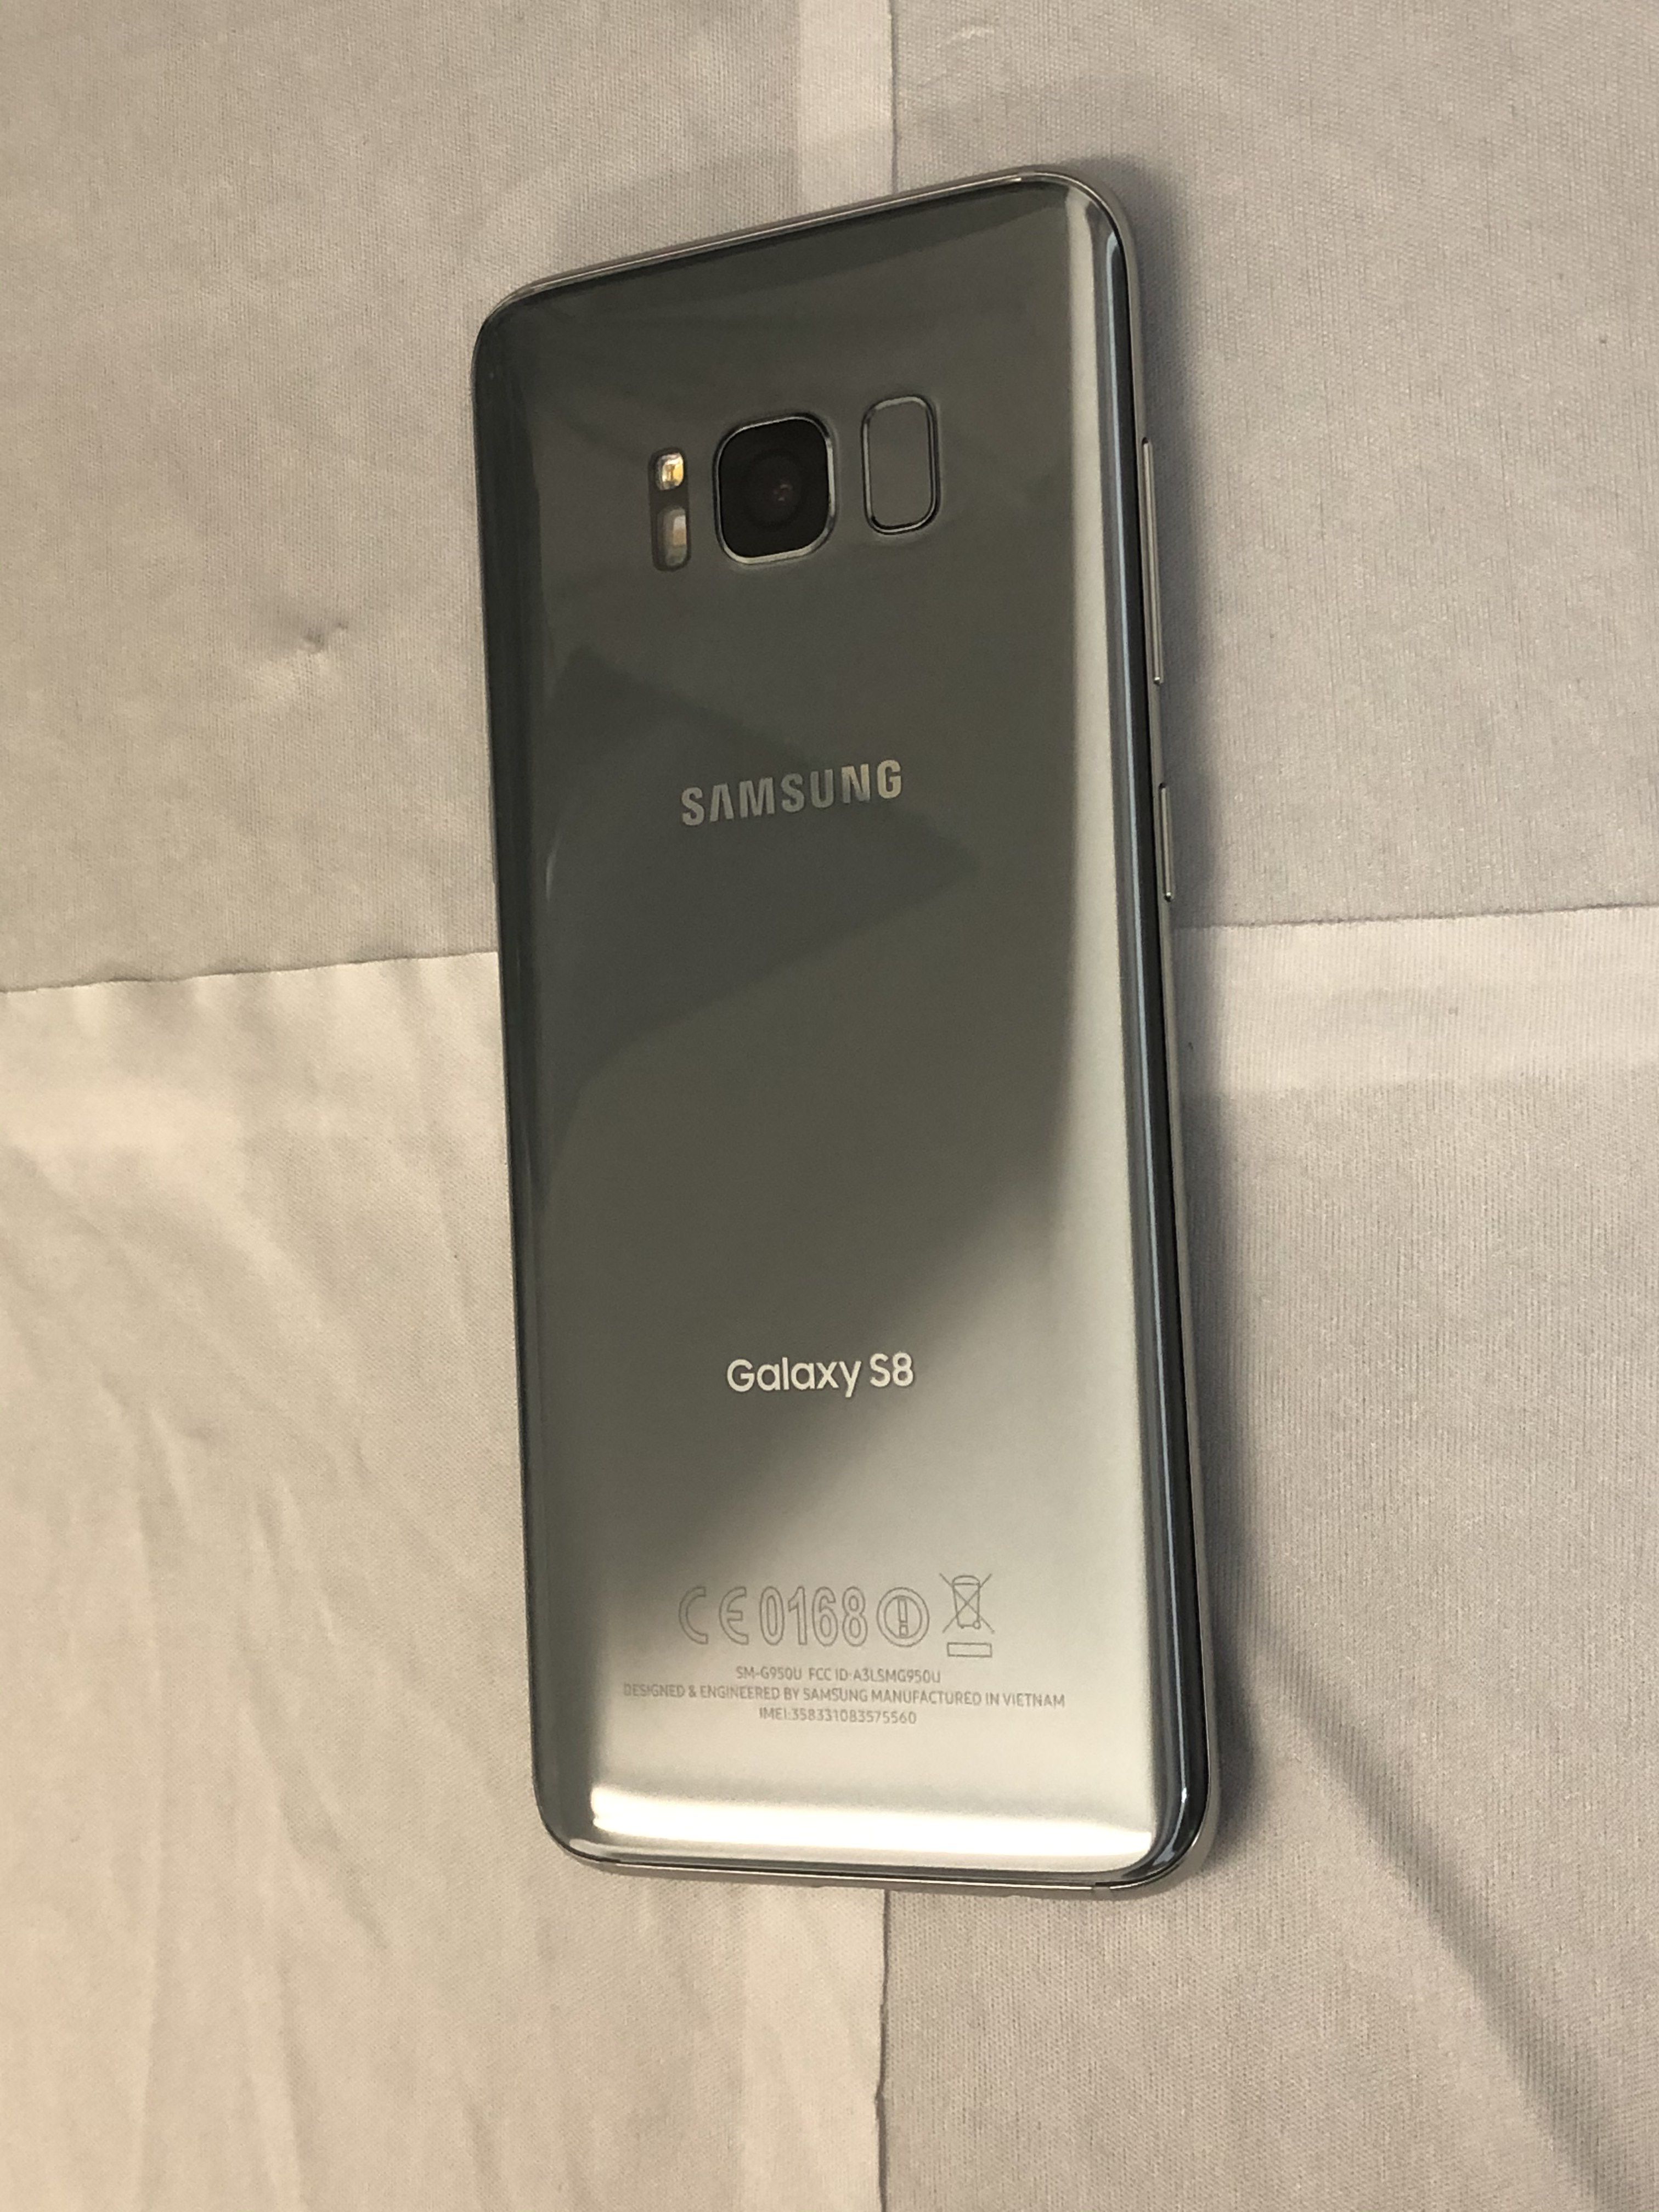 Samsung Galaxy S8 64GB || Silver || *UNLOCKED* for AT&T / Cricket / T-Mobile / MetroPCS / Simple Mobile / Sprint / Verizon / others WORLWIDE